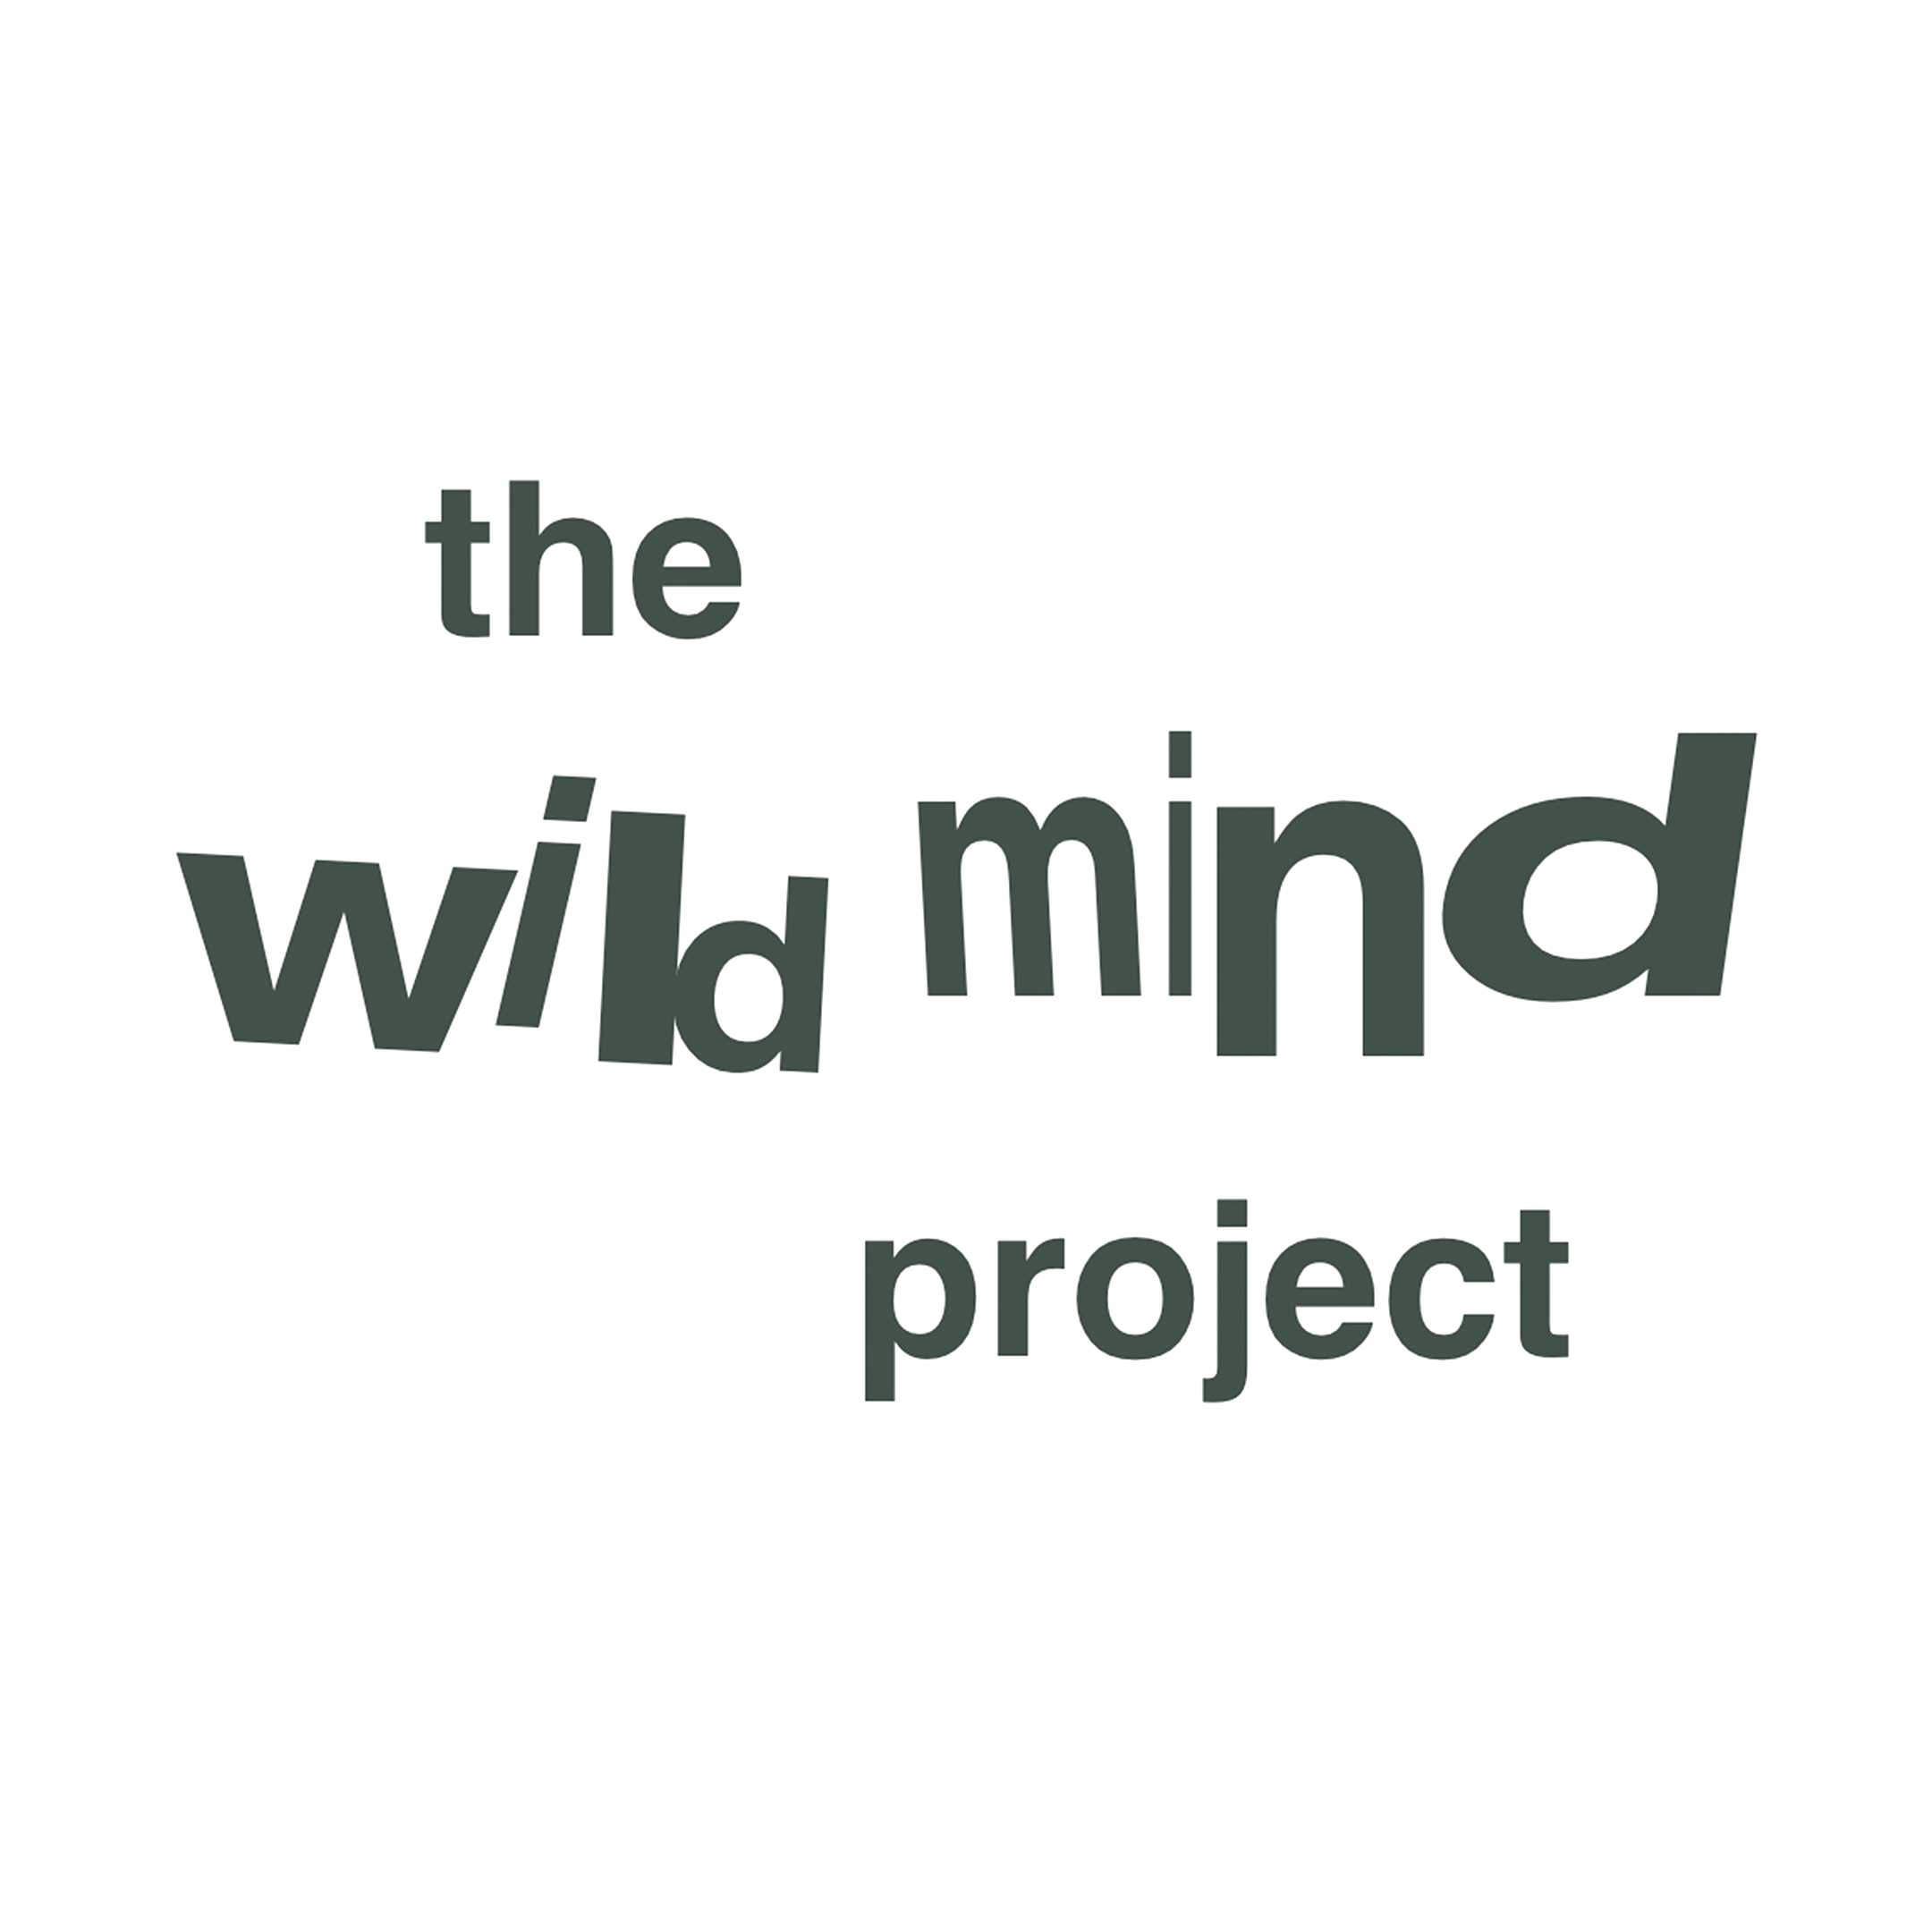 The Wild Mind Project